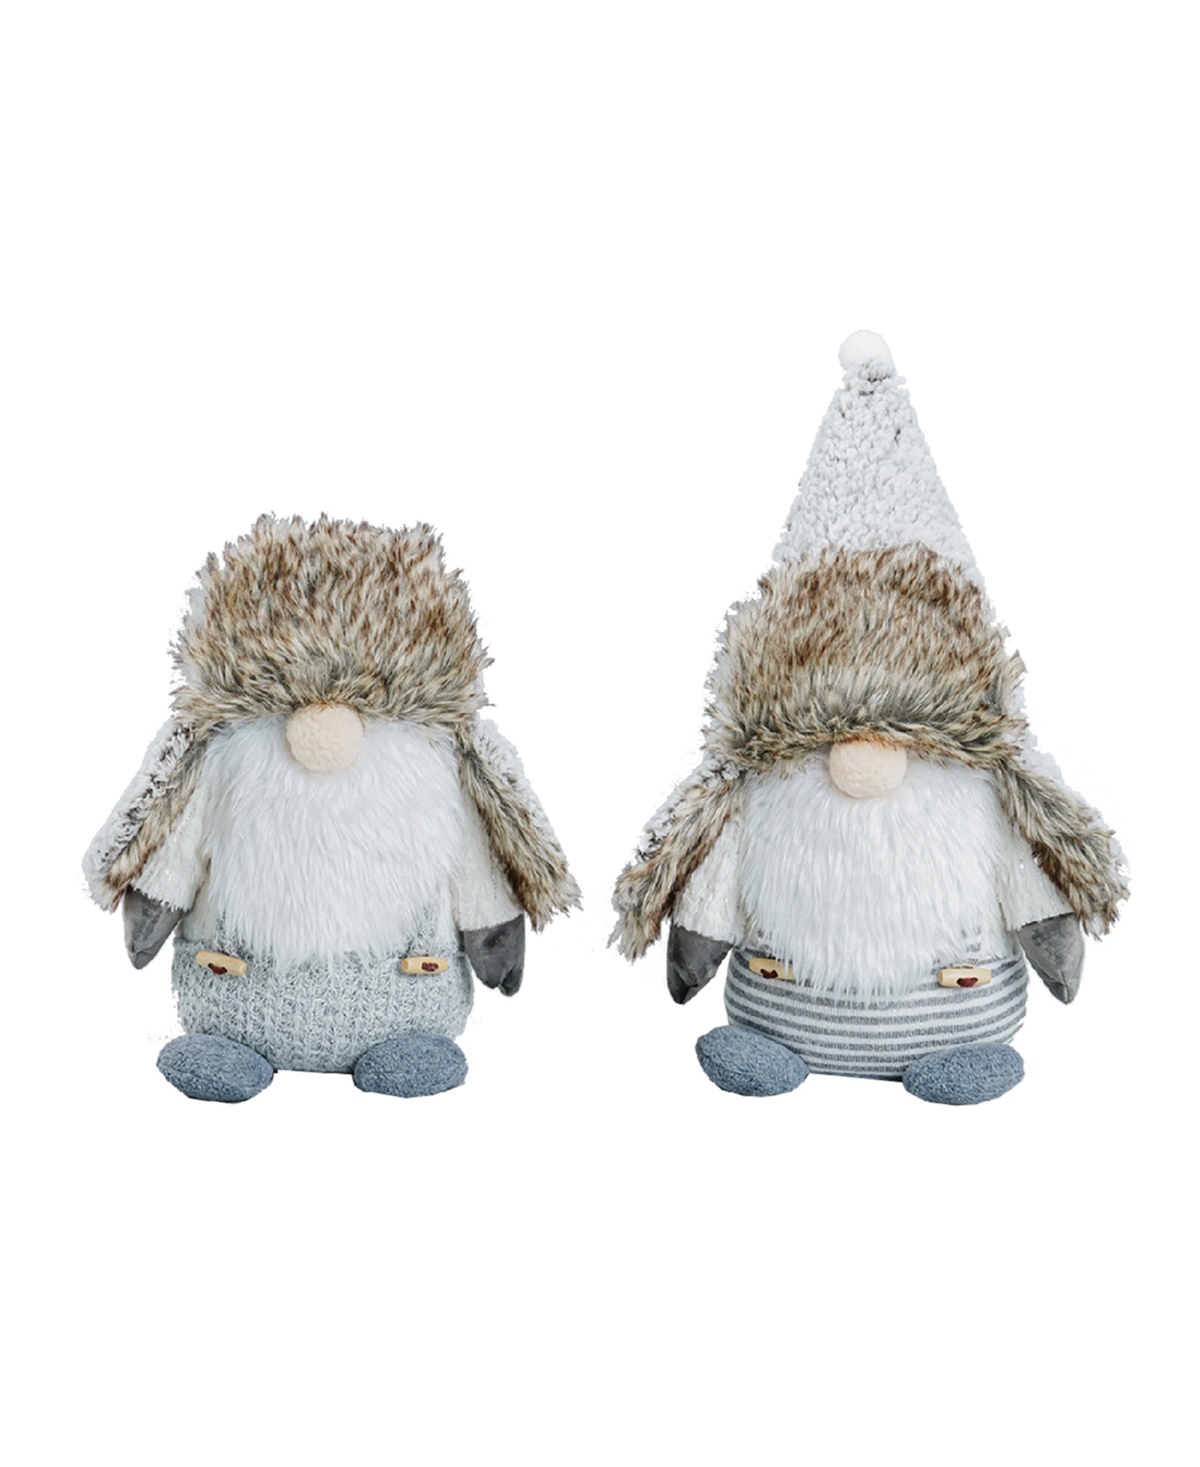 12.5" Gnome Brothers, Set of 2 - Gray